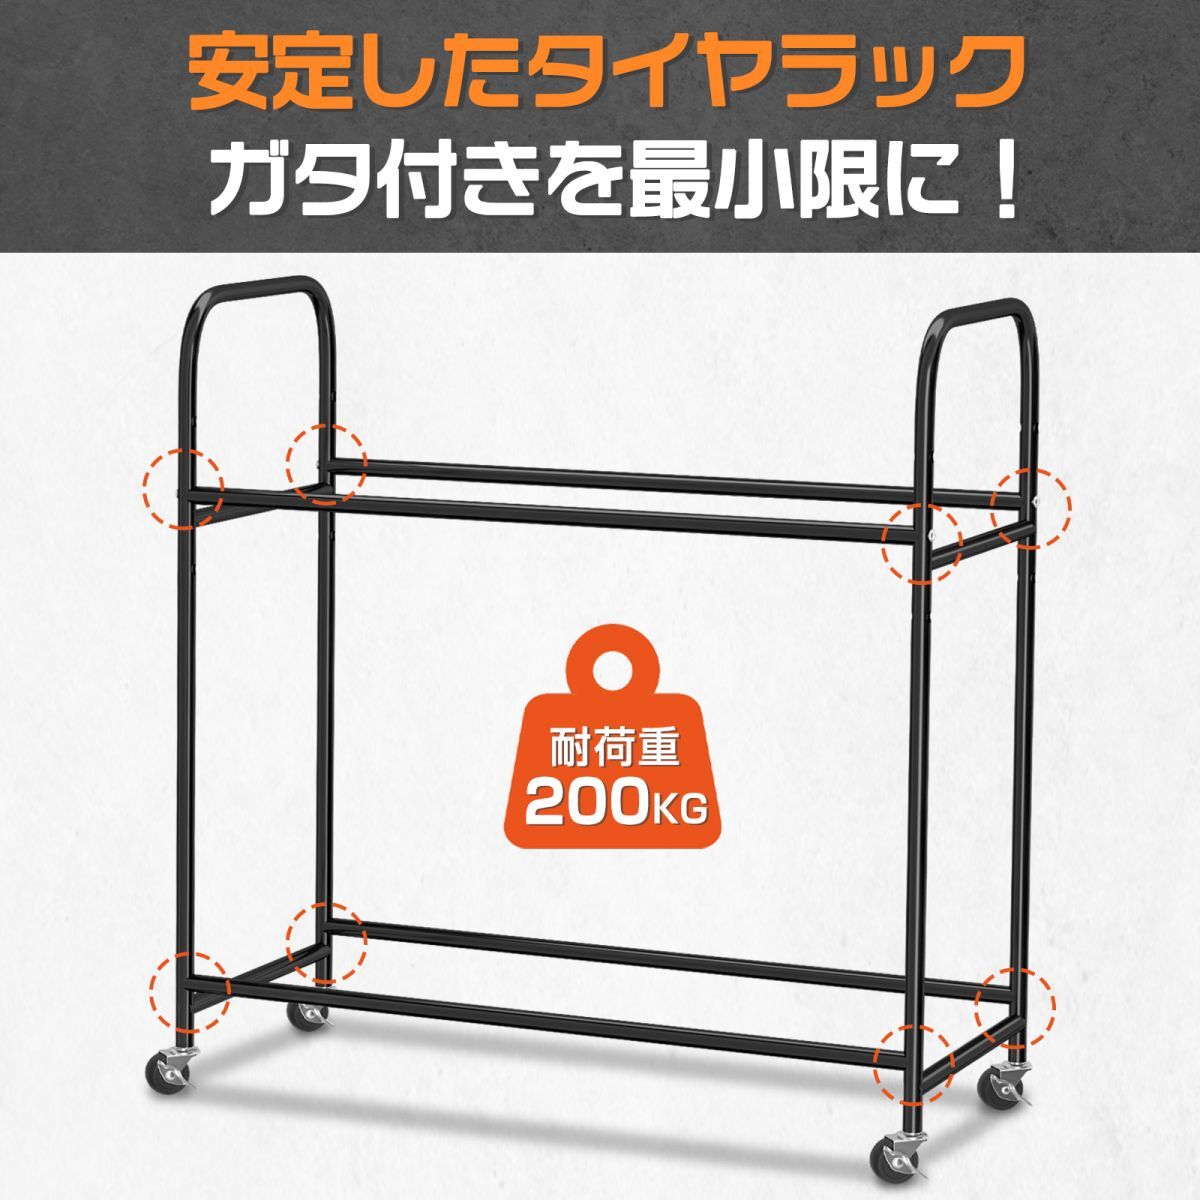  width 105cm tire rack maximum storage 8ps.@ with casters . stand 3 step adjustment possibility tire stand tire storage rack exchange storage free shipping TR001